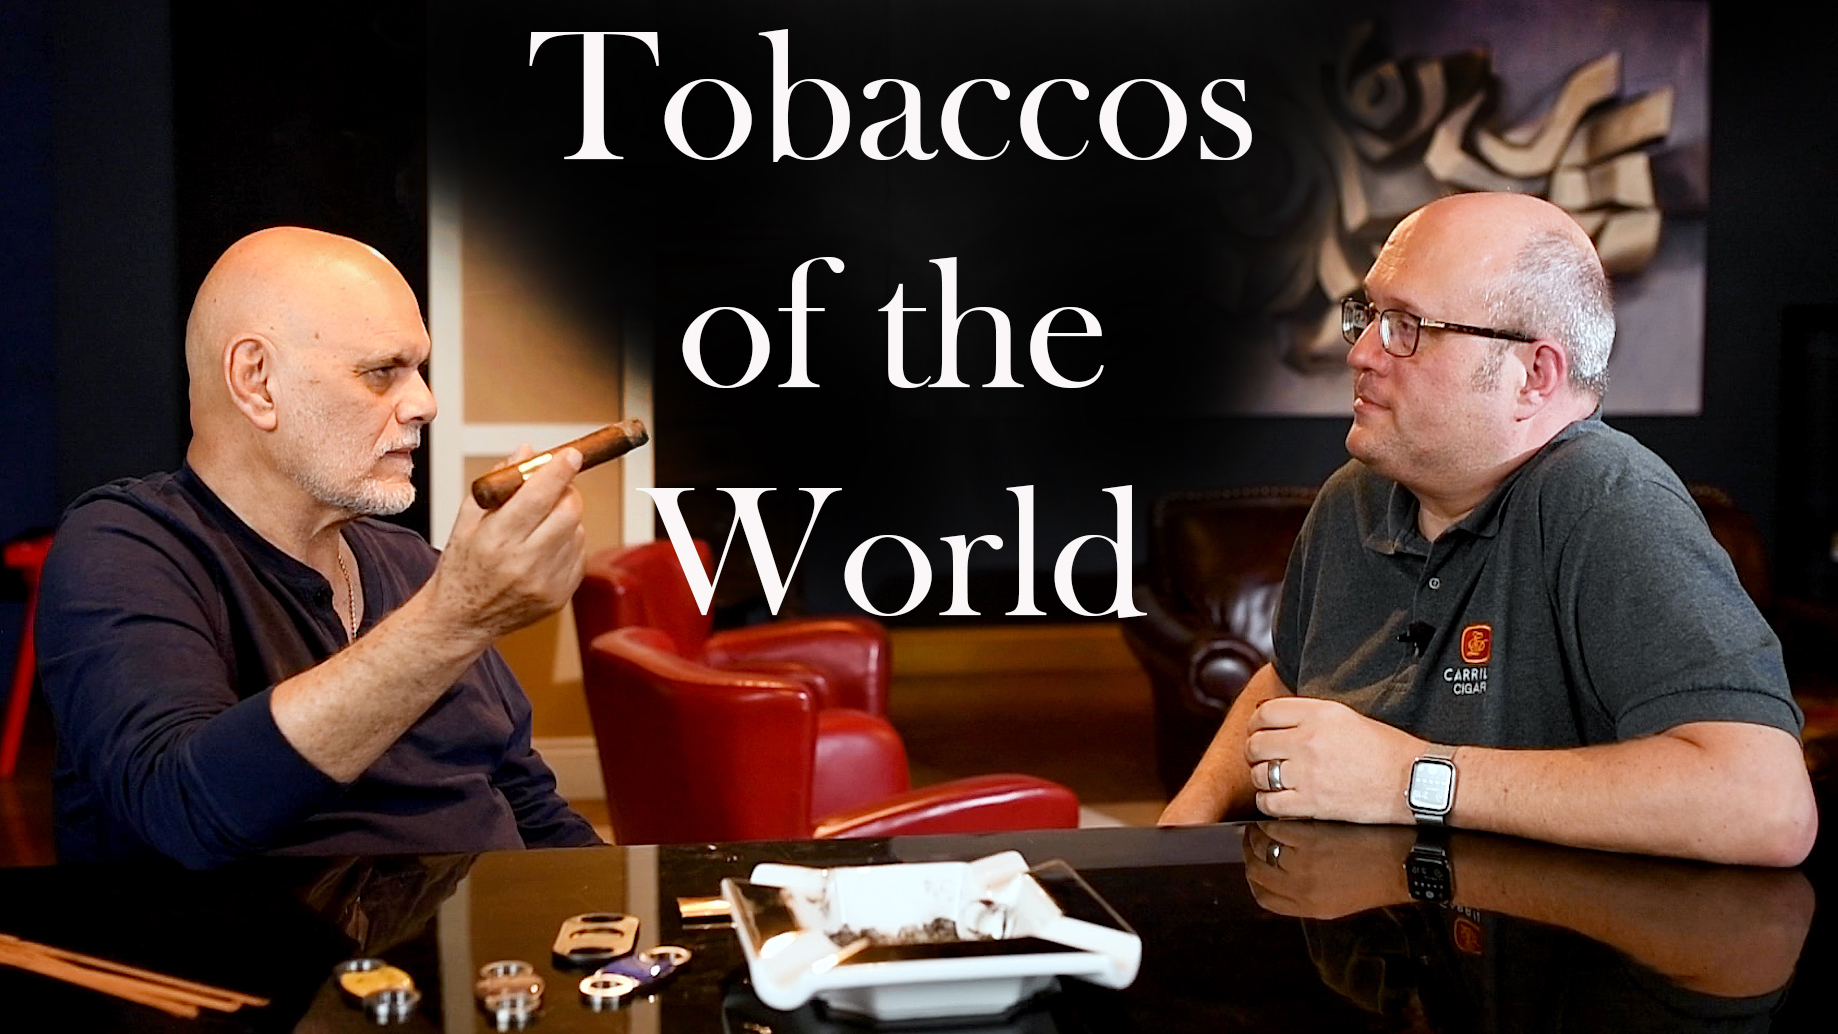 Tobaccos of the World